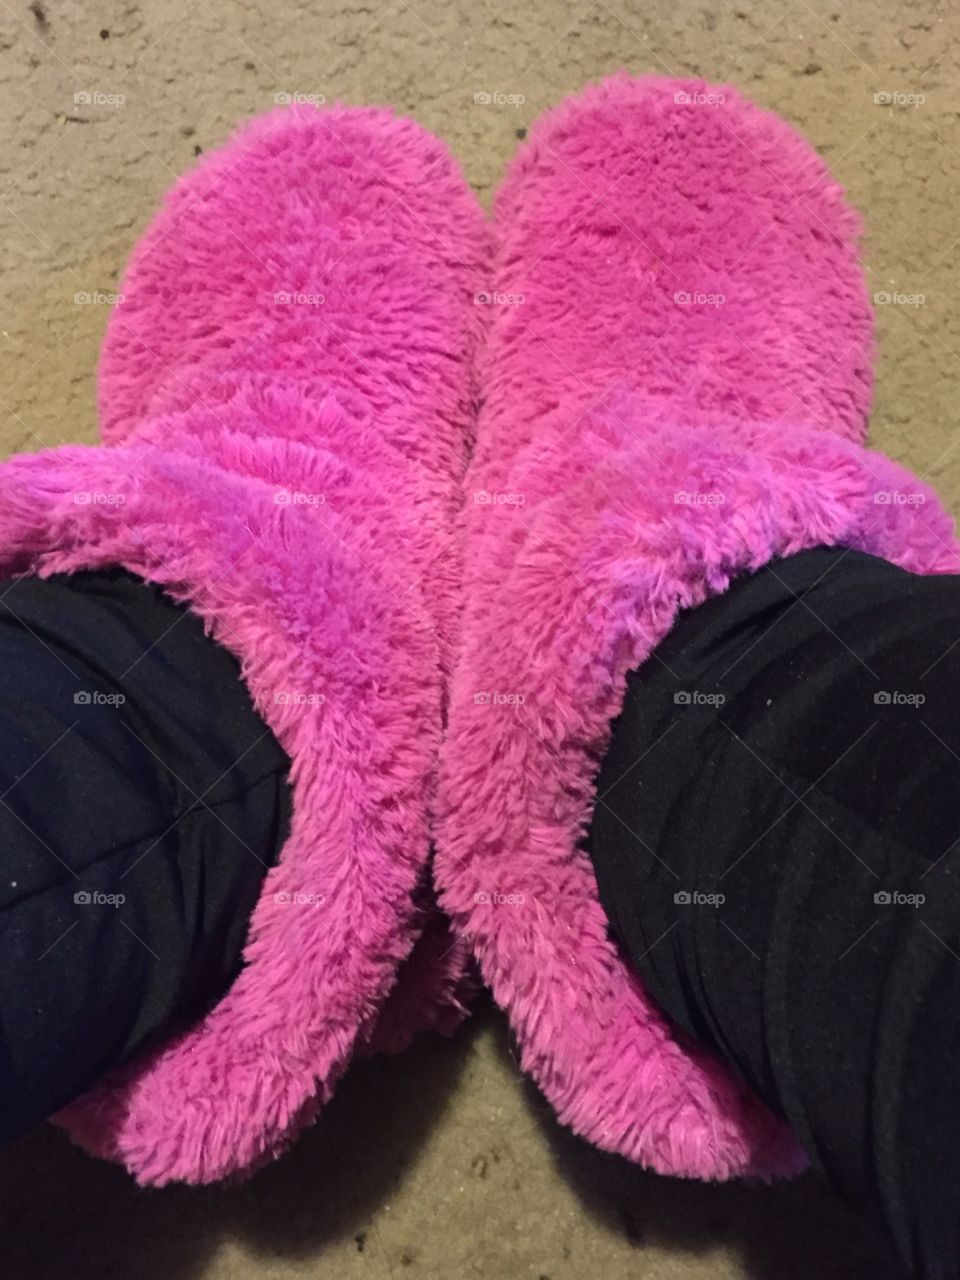 Pink fuzzy slippers help me at the end of a long day 